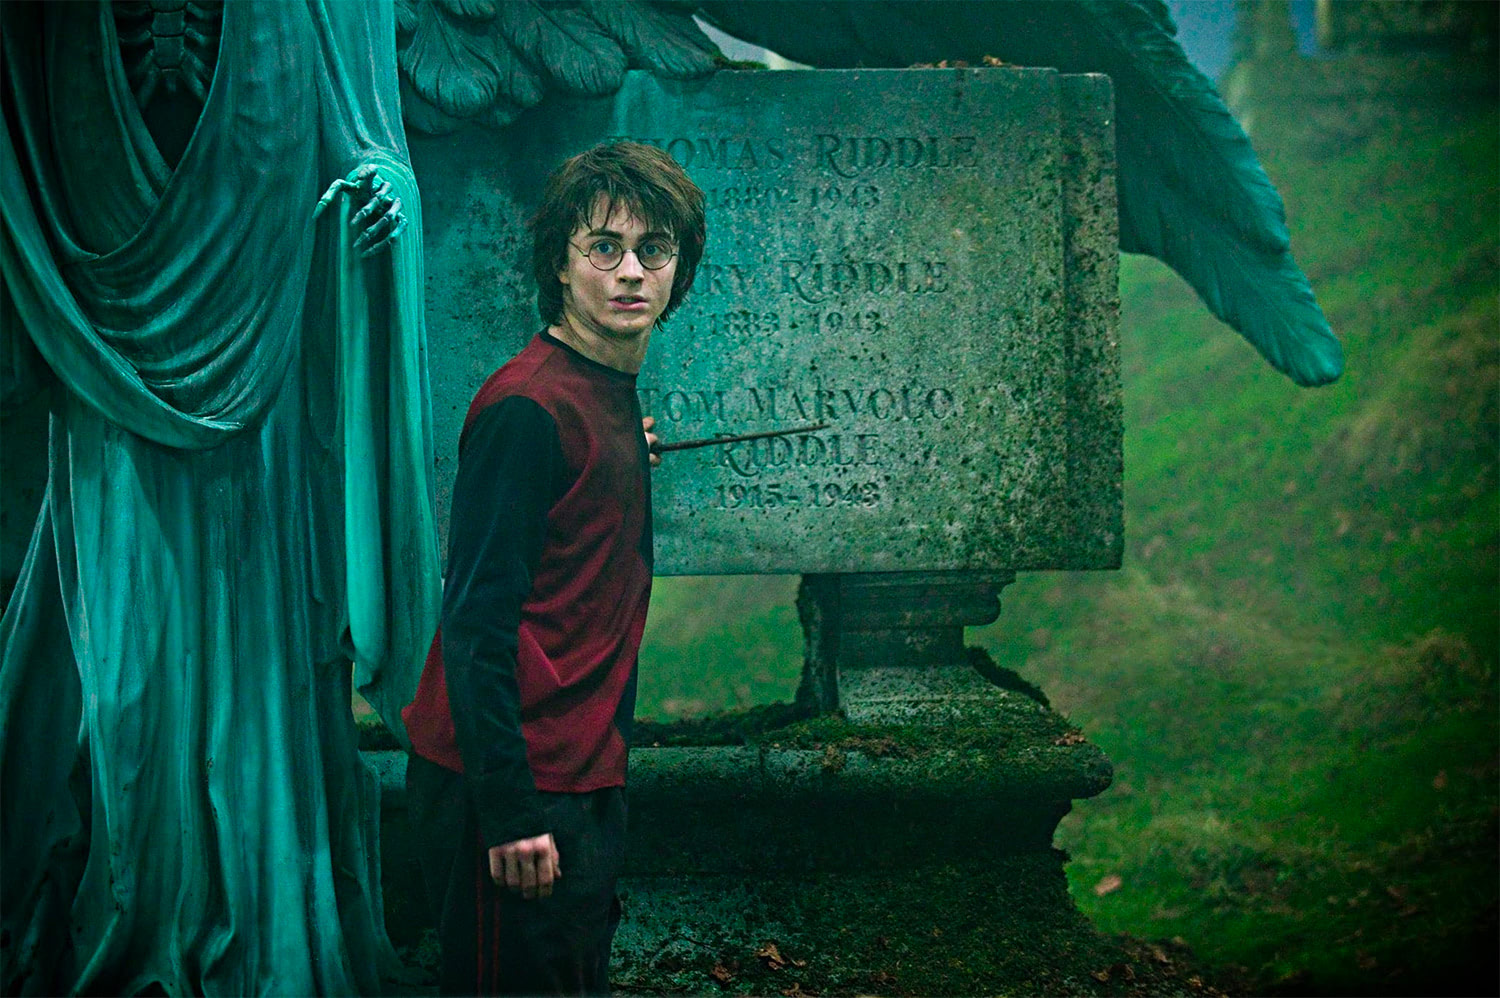 Harry in the graveyard